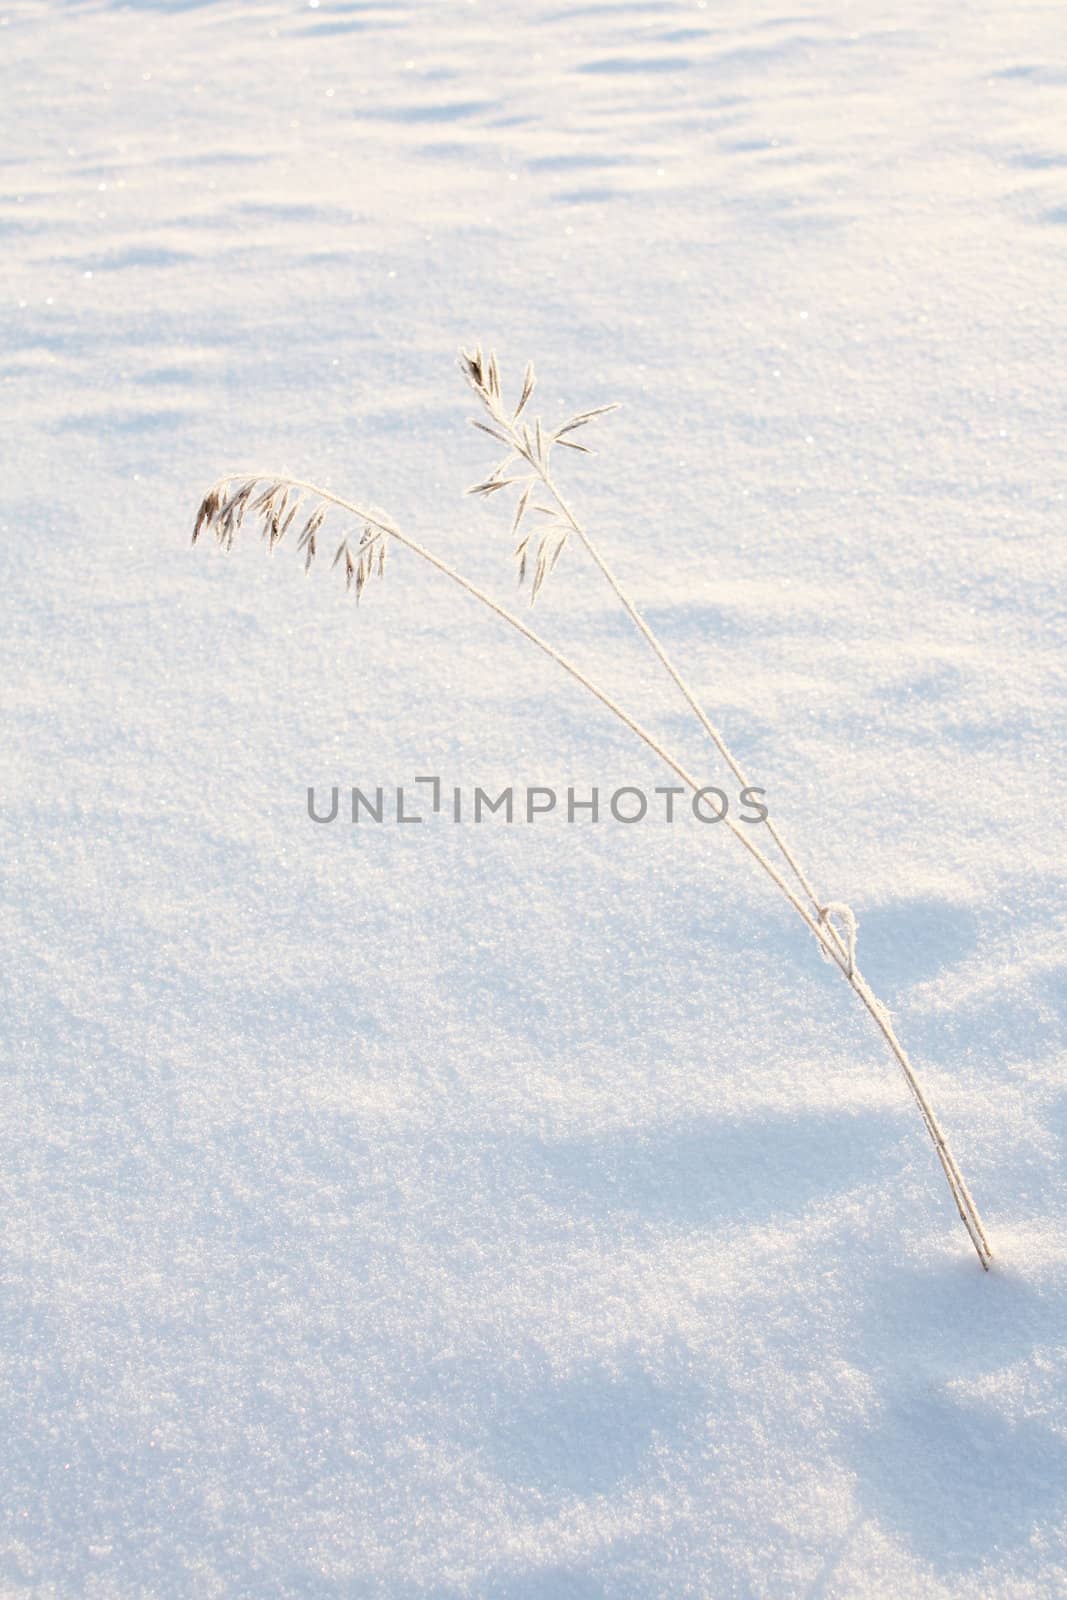 two stalks of grass covered in frost, on a background of glittering pristine snow.